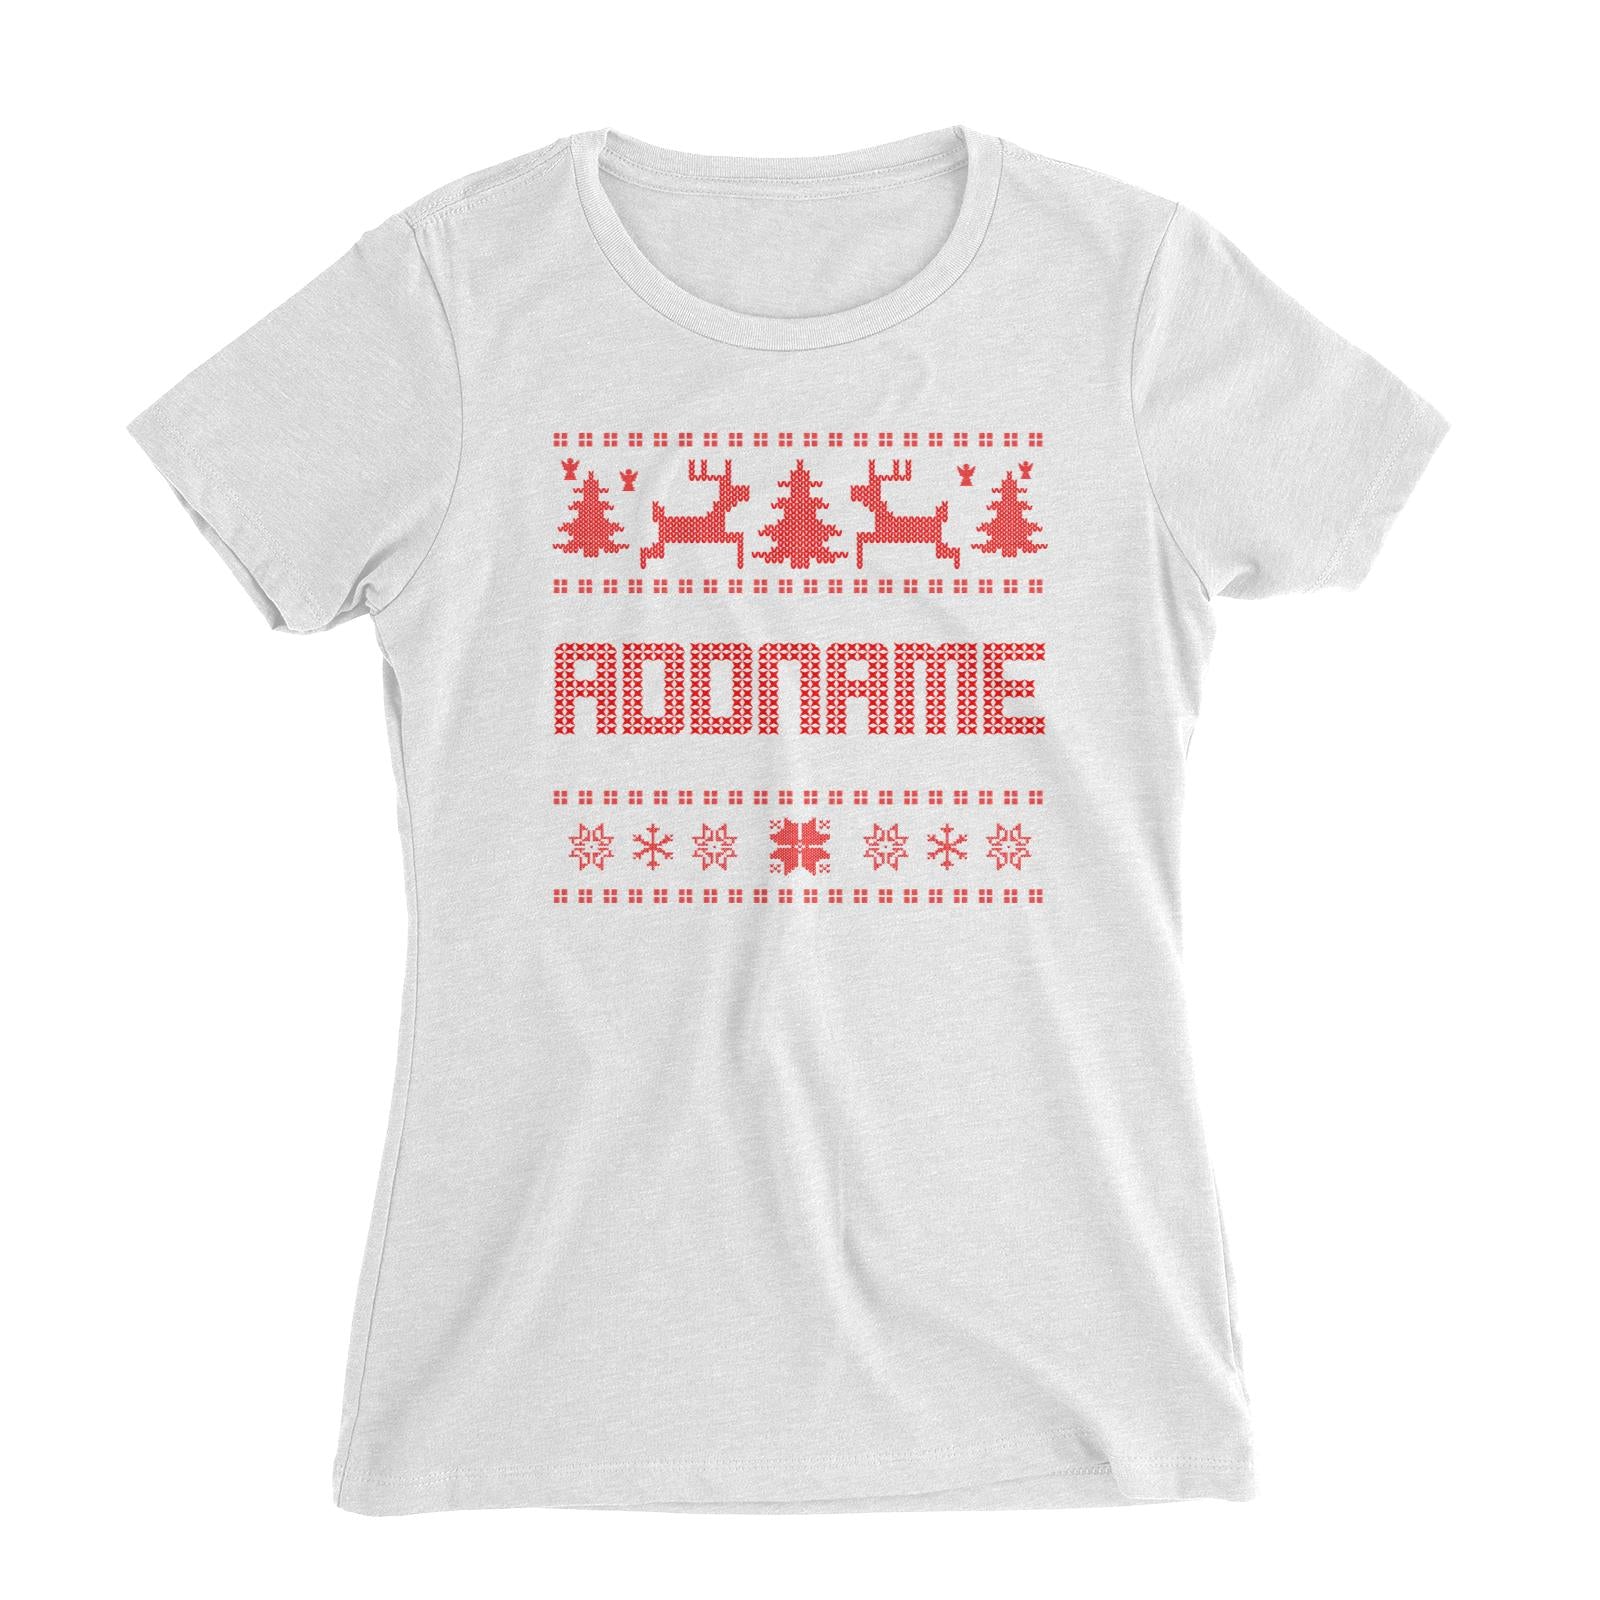 Christmas Sweater Addname Women's Slim Fit T-Shirt  Matching Family Personalizable Designs